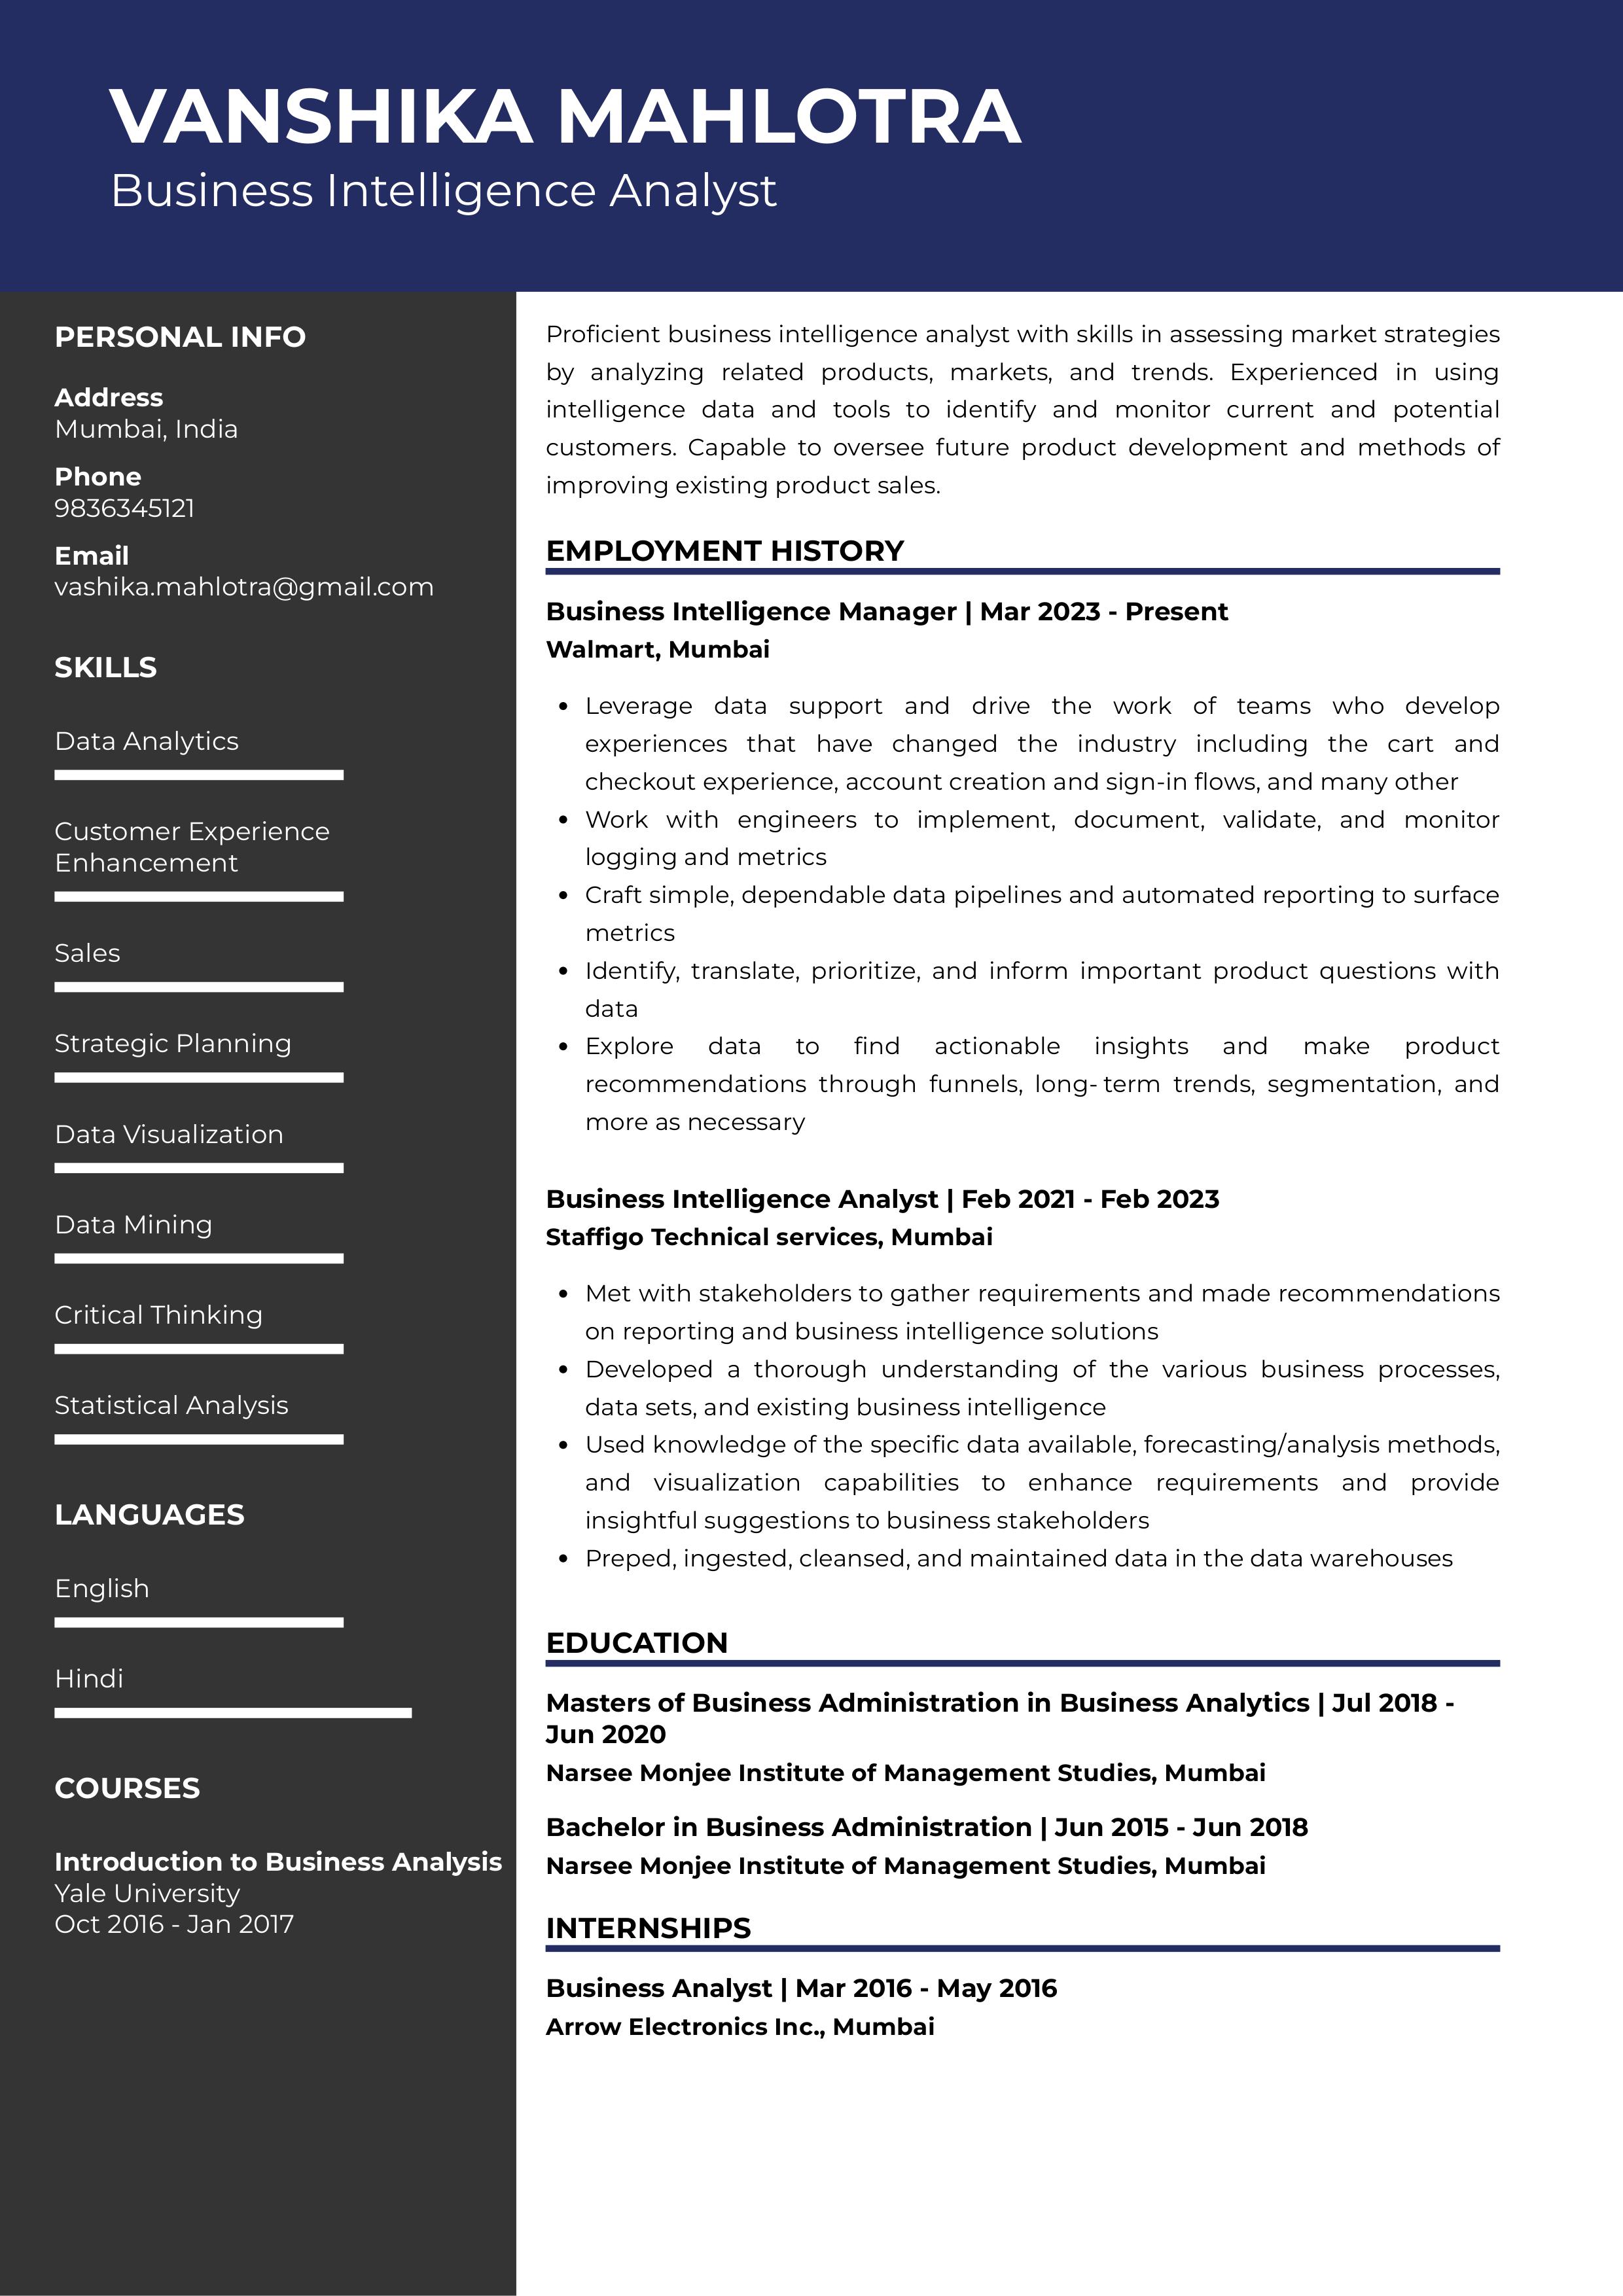 Sample Resume of Business Intelligence Analyst | Free Resume Templates & Samples on Resumod.co